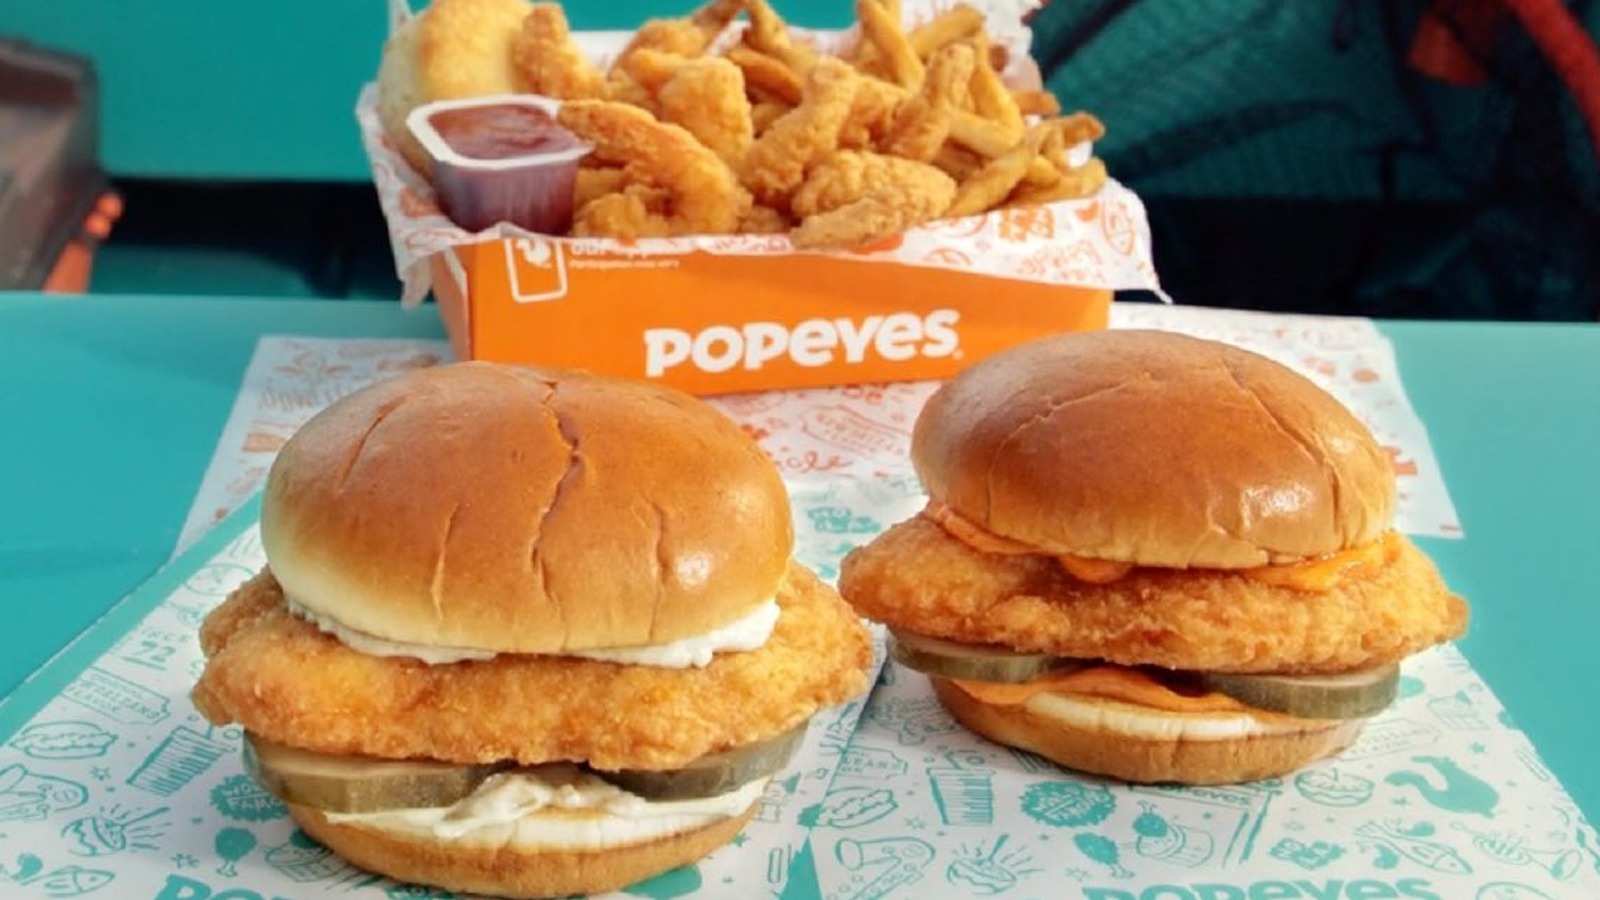 Popeyes Flounder Fish Sandwich Makes A Limited Time Return